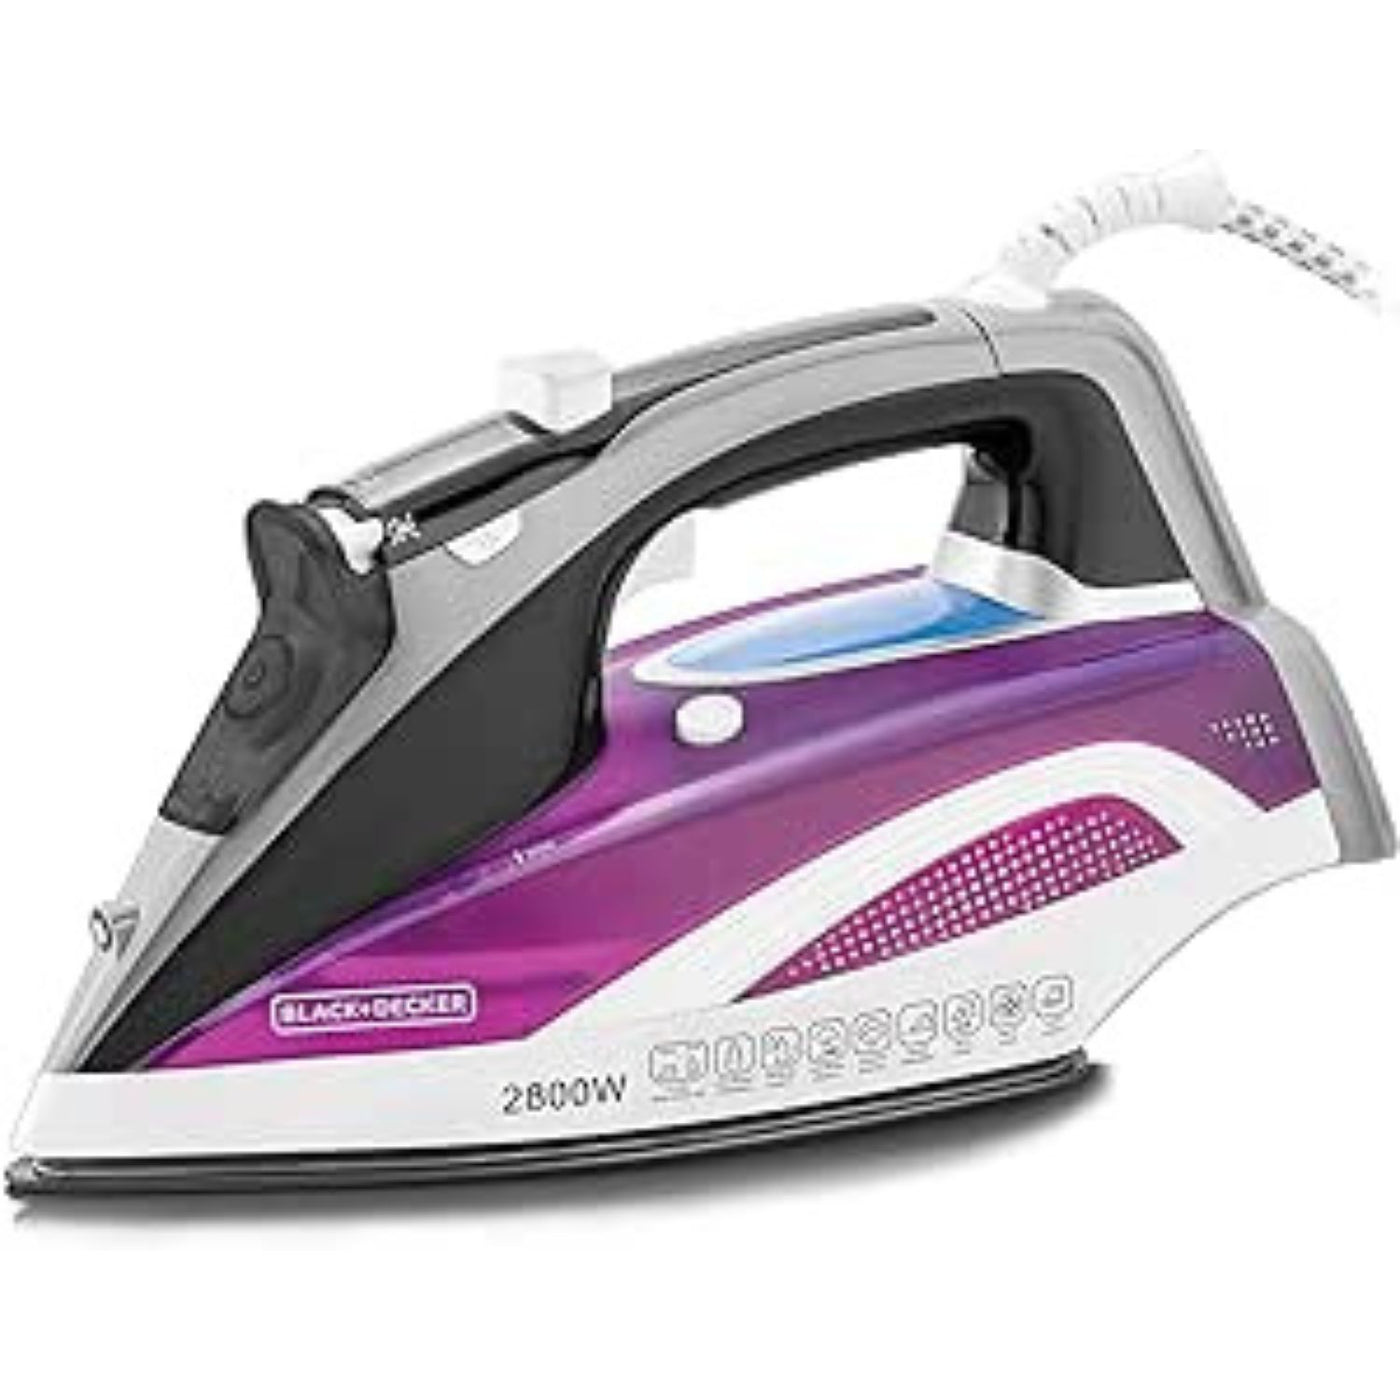 2800W Digital Pre-Programmed Steam Iron, Anodized Sole Plate with Eco Mode, Multicolour